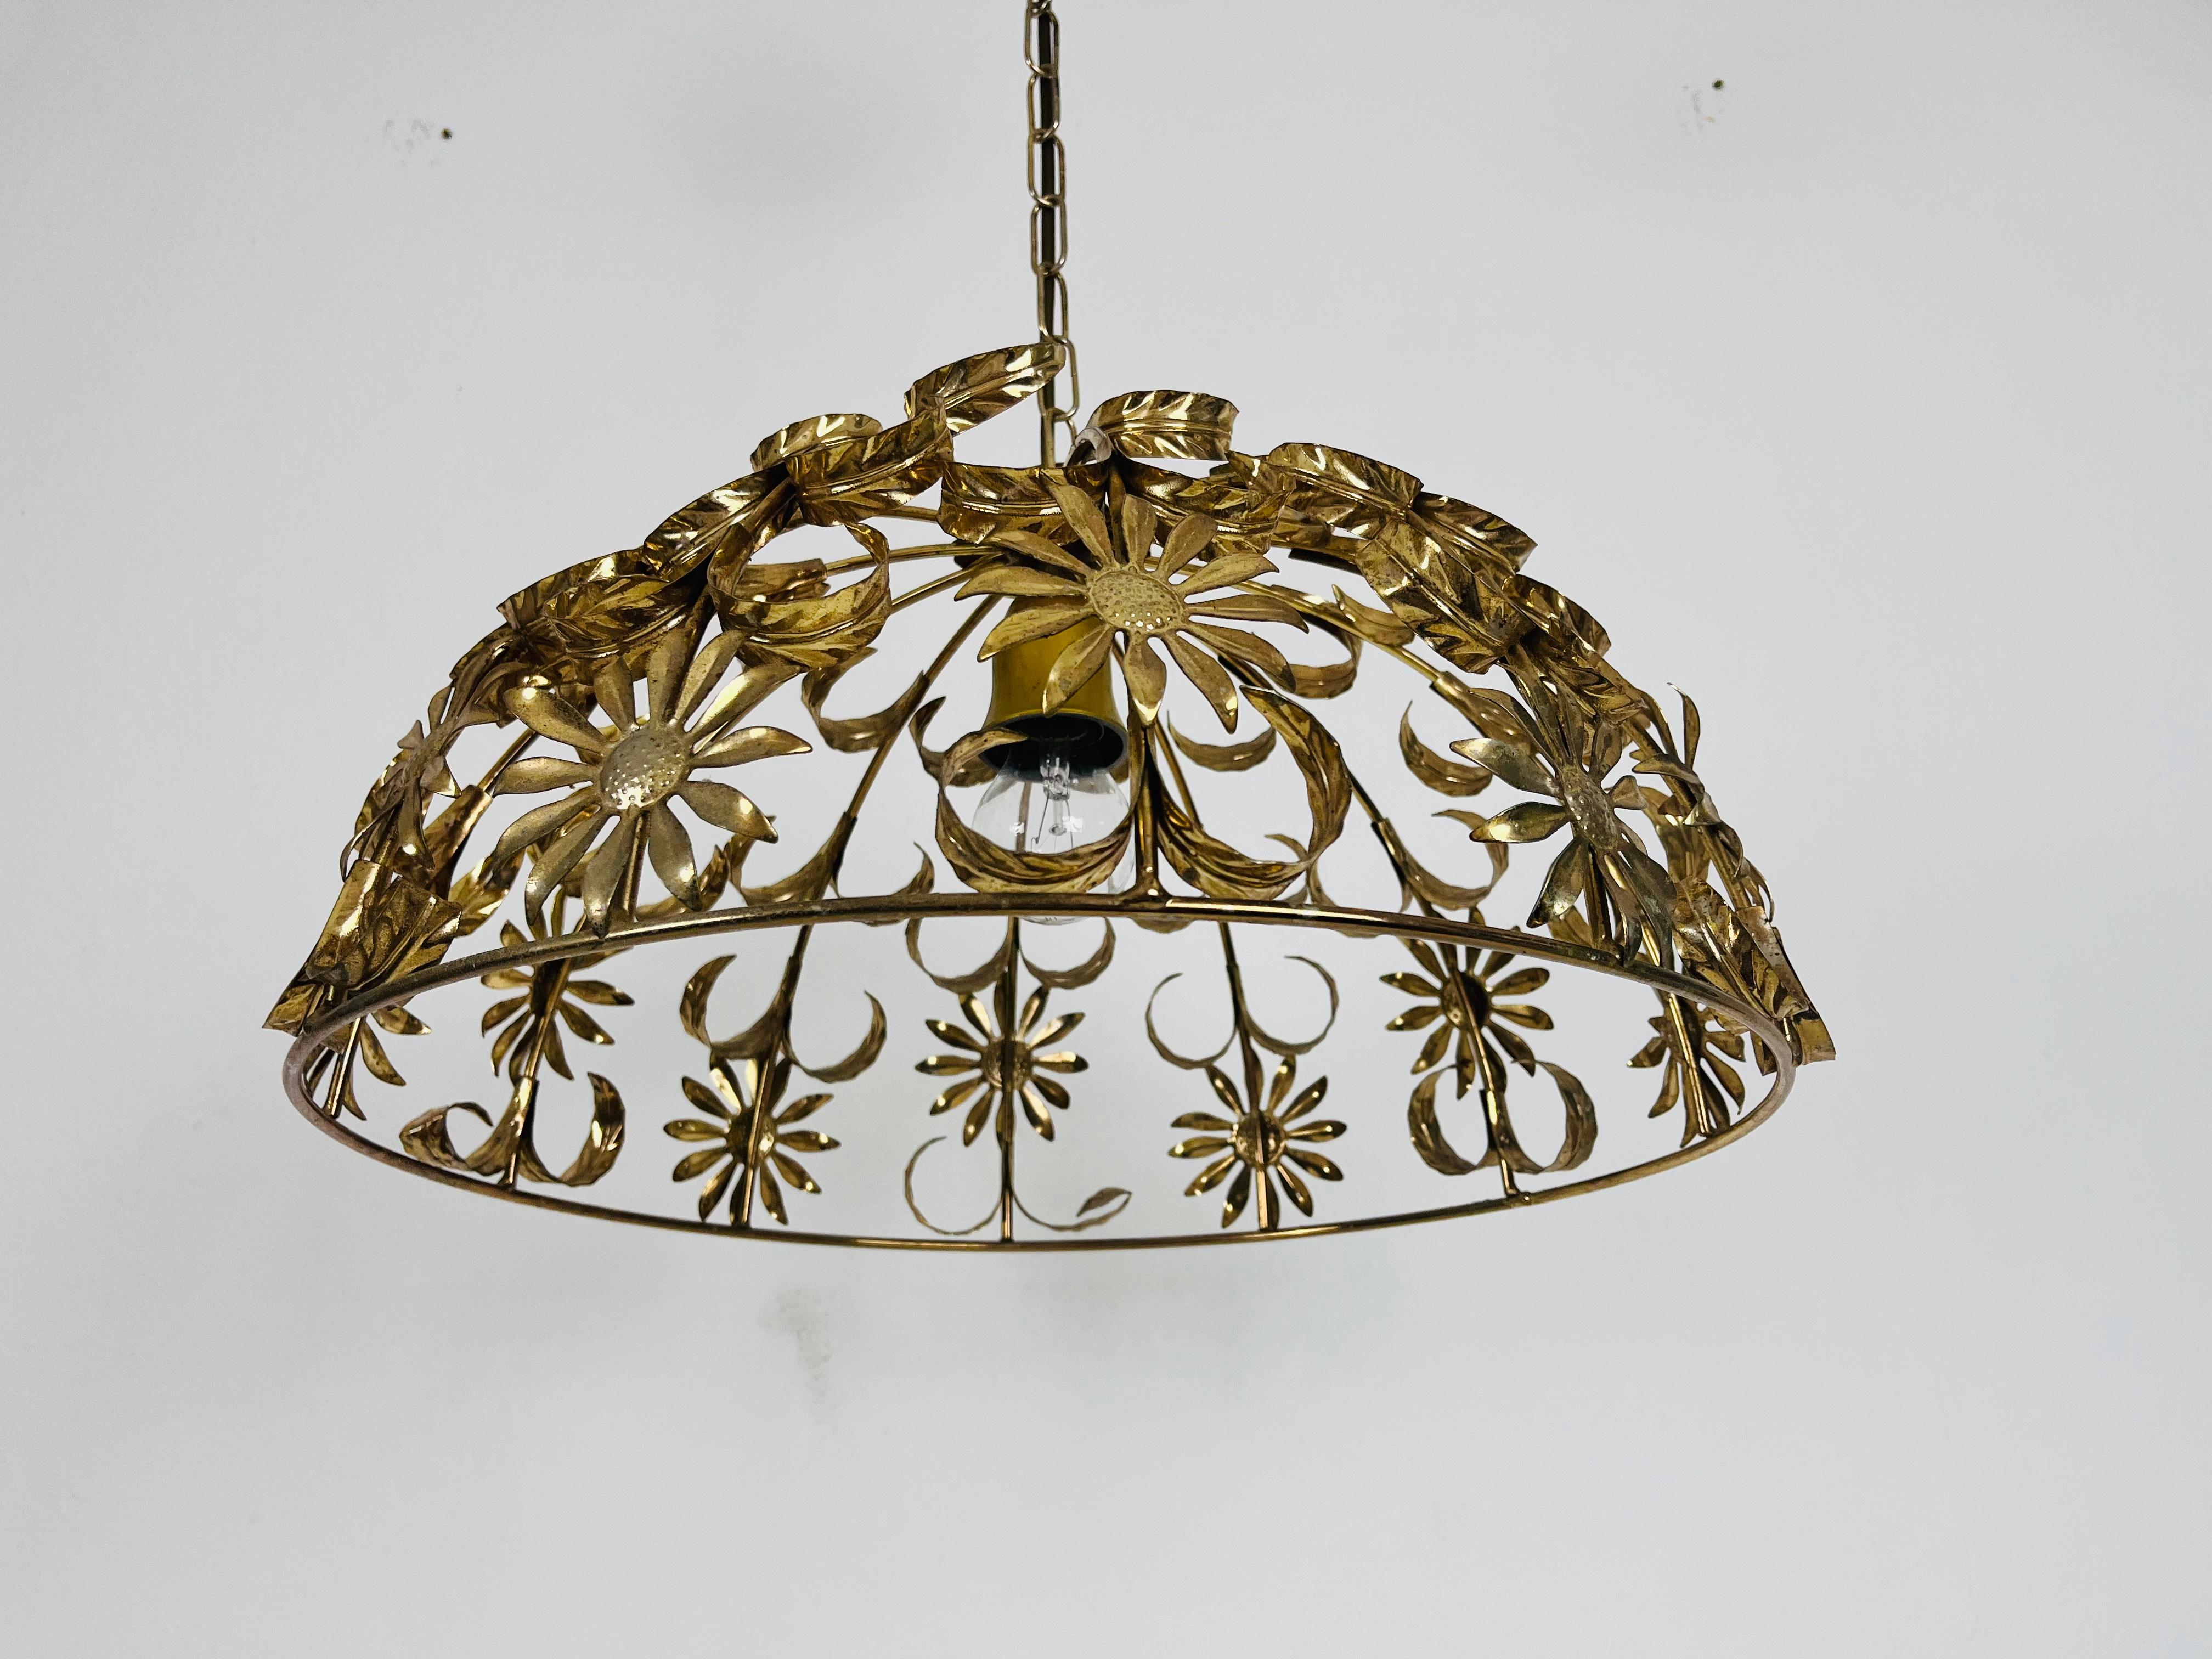 An extraordinary pendant lamp attributed to Banci made in Italy in the 1950s. The lamp has a beautiful wheat sheaf design. It is made in the period of Hollywood Regency. 

The light requires one E27 light bulb. Works with both 110/220V. Very good